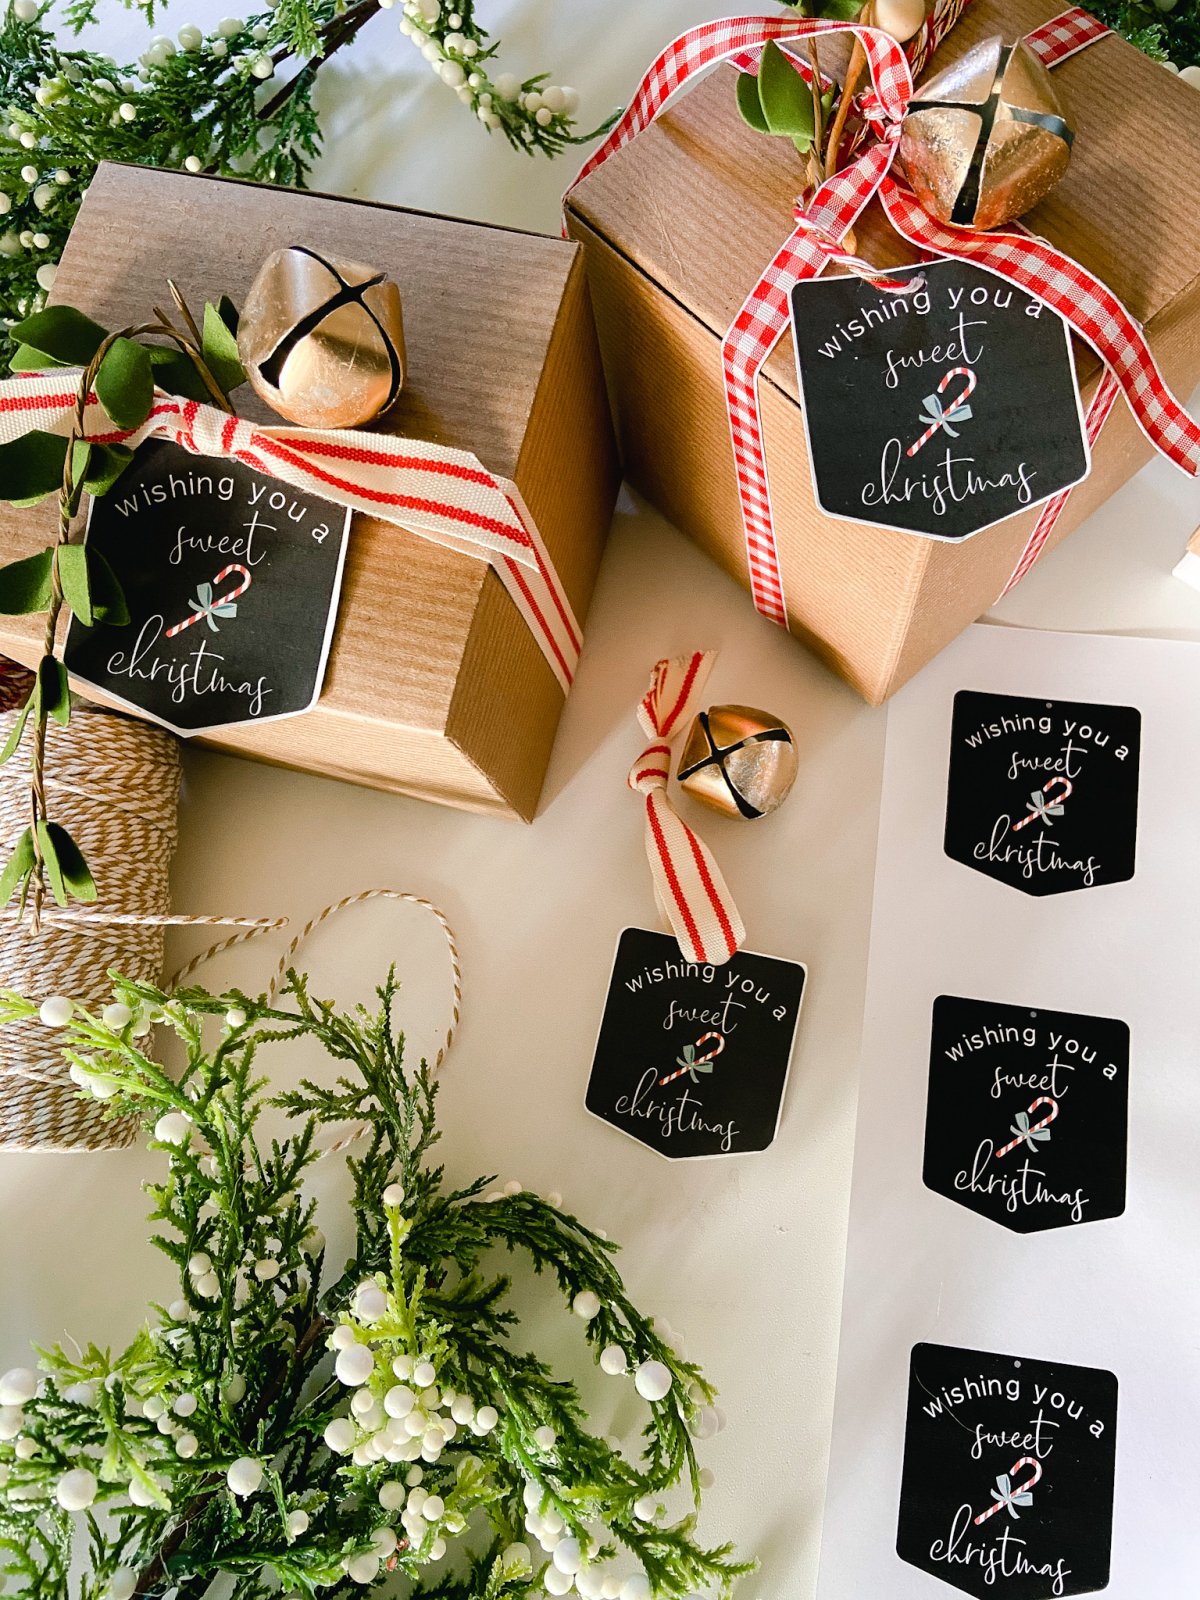 Candy Cane Printable Christmas Gift Tags. Print these whimsical candy cane tags for easy gift giving this holiday season. 